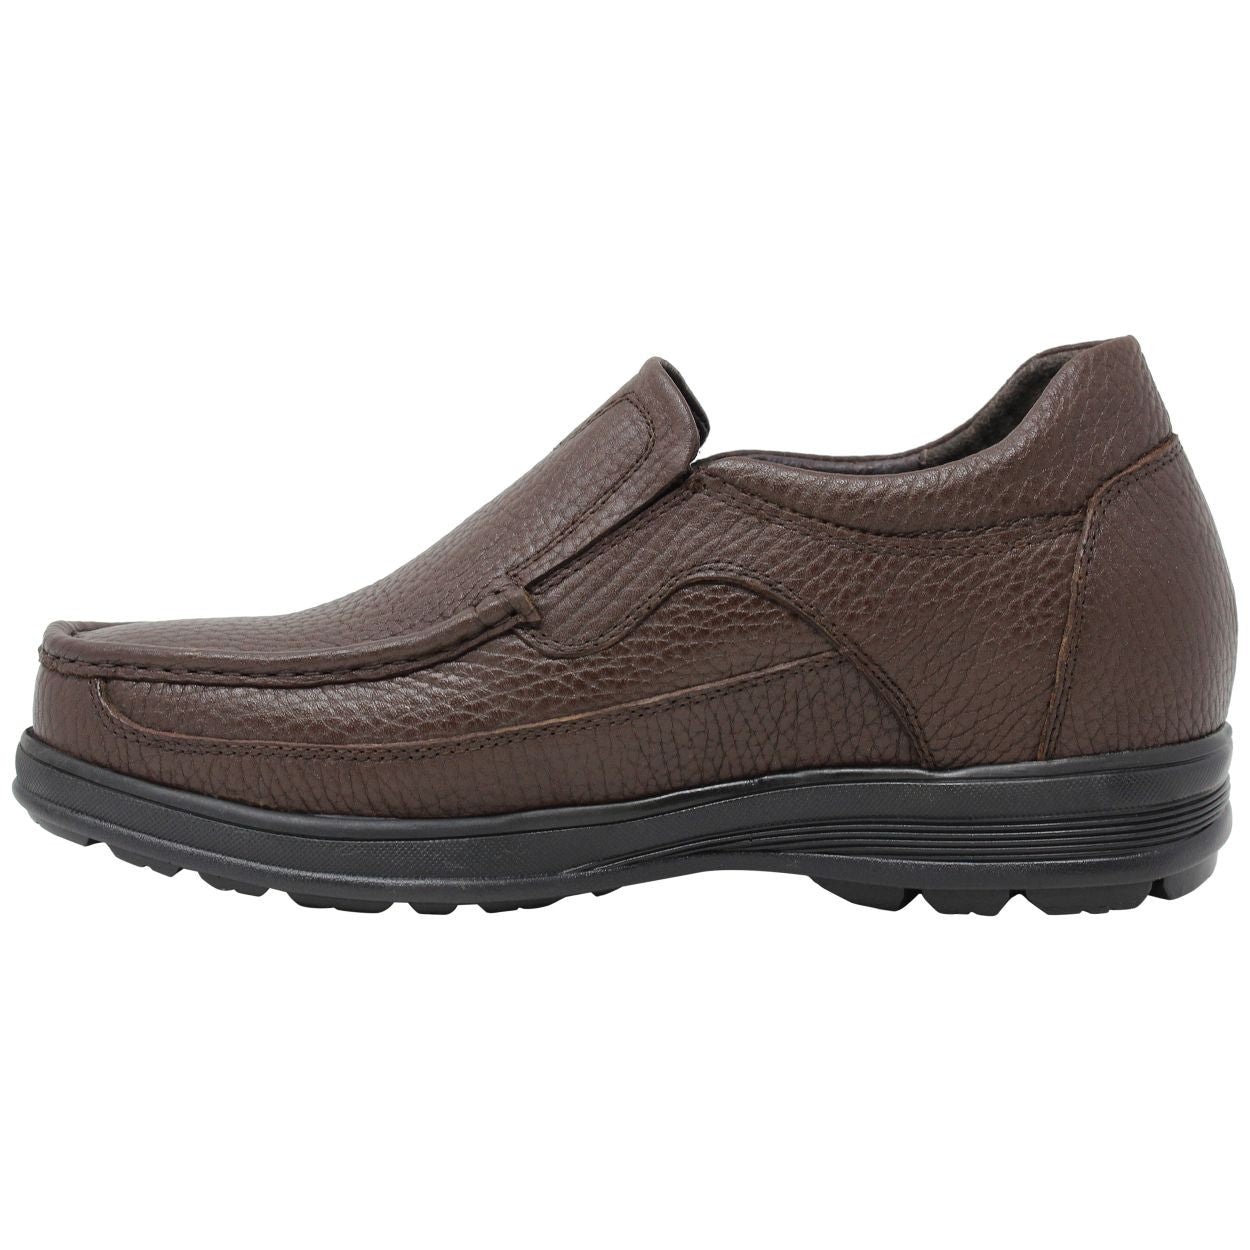 Elevator shoes height increase CALTO - G1827 - 3 Inches Taller (Brown) - Lightweight